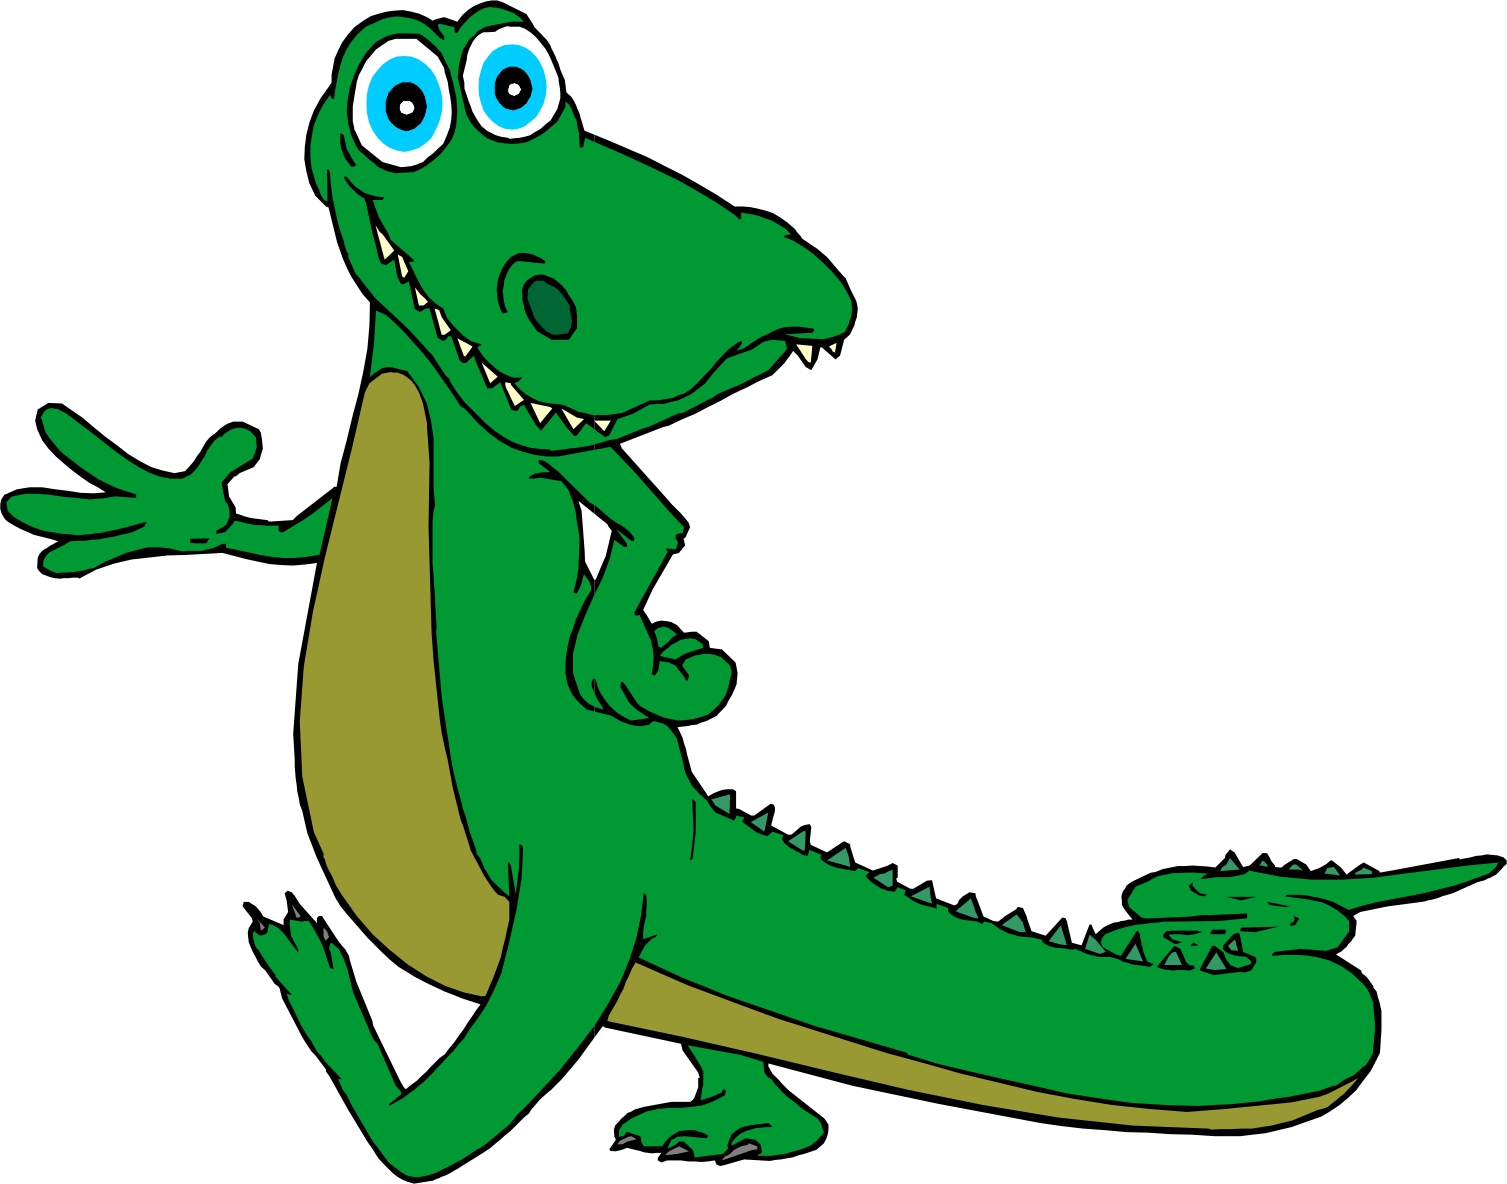 Cartoon Alligator - Clipart library - Clipart library